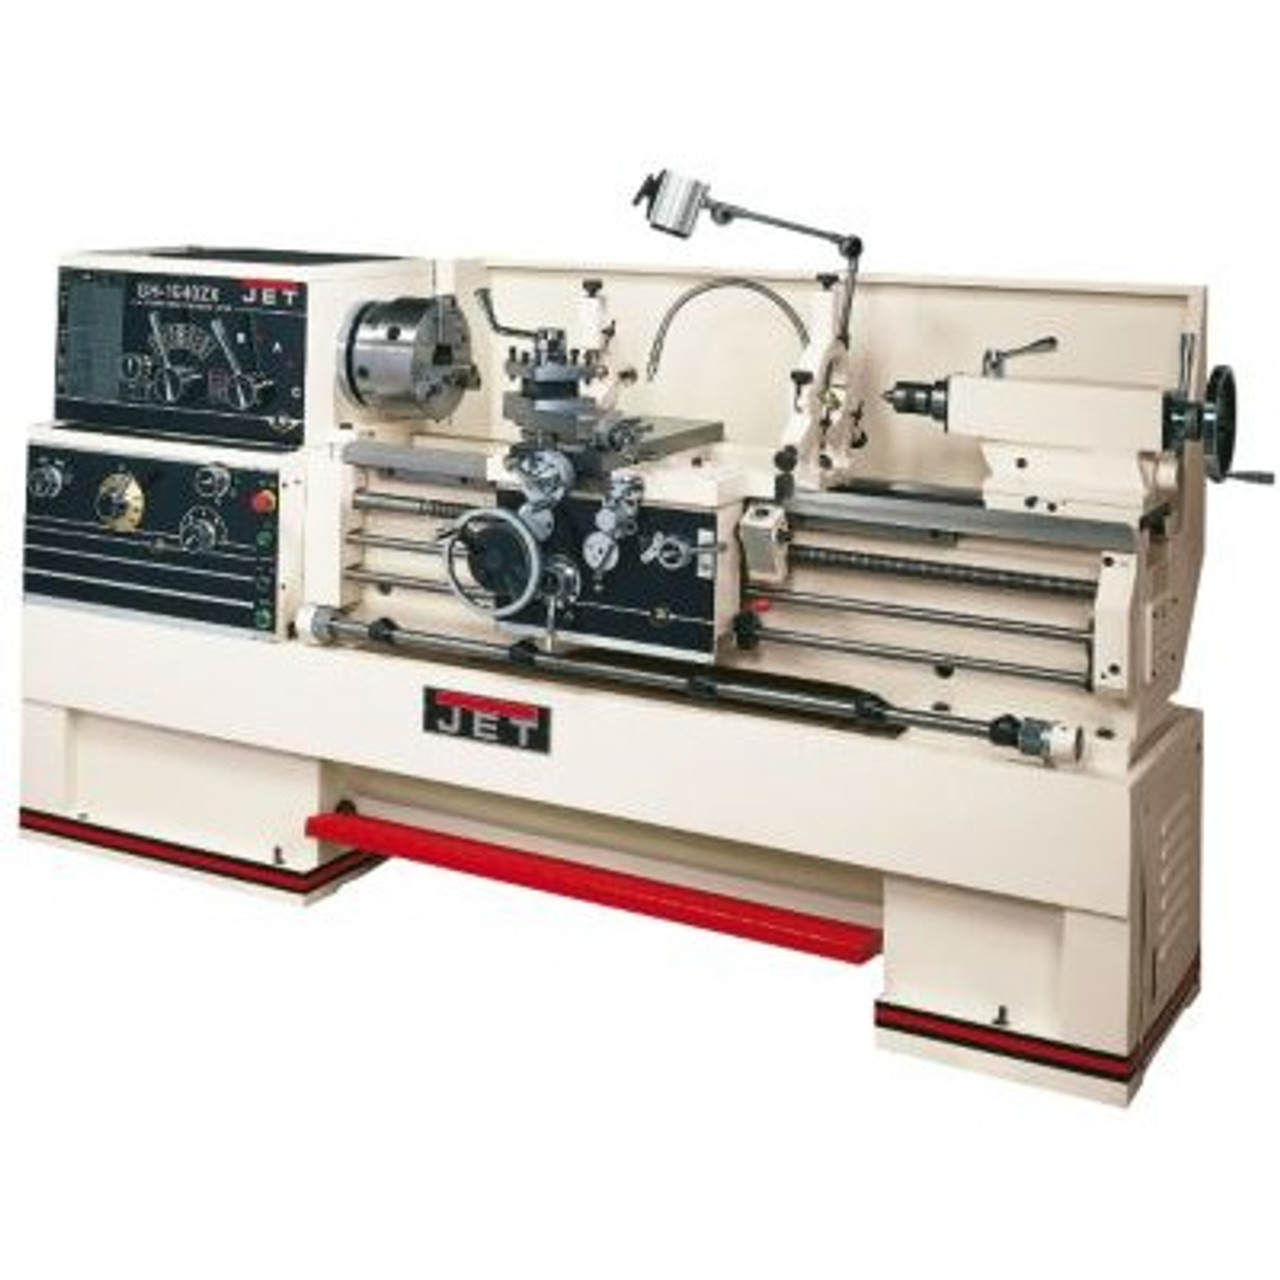 Jet GH-1860ZX, ZX Series Large Spindle Bore Lathe